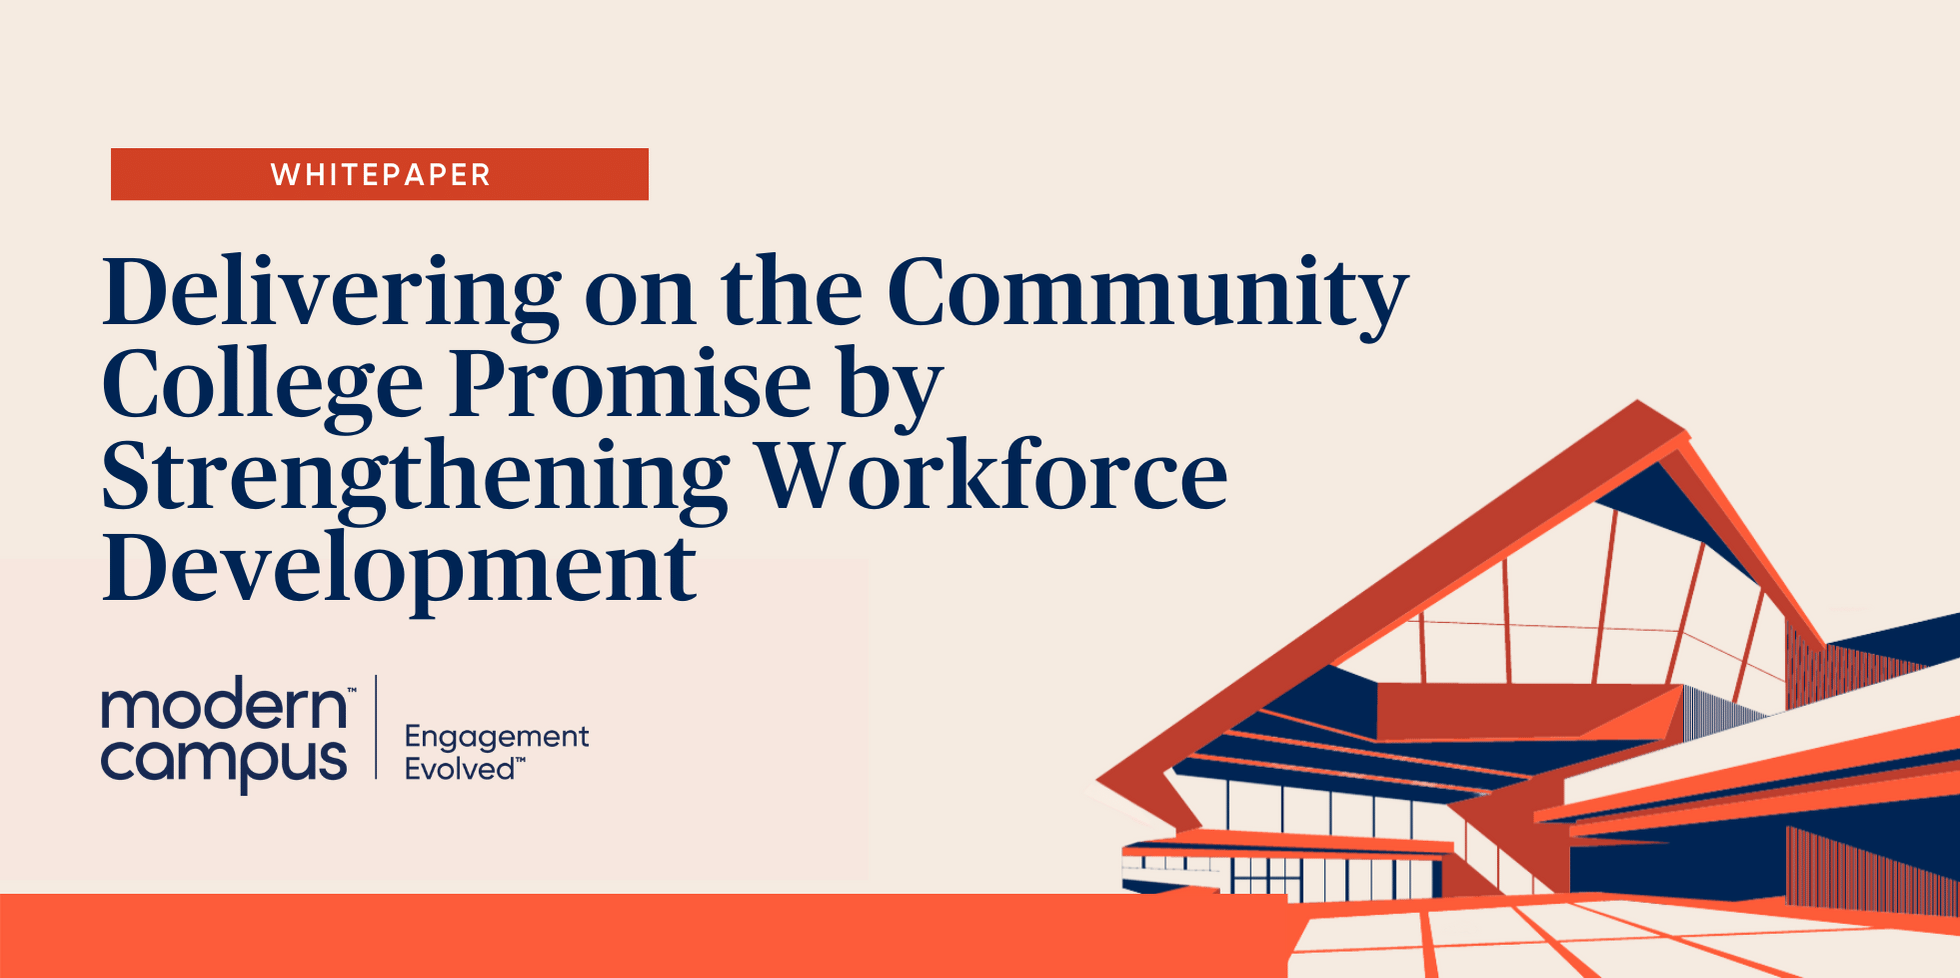 Learn how to deliver on the community college promise.